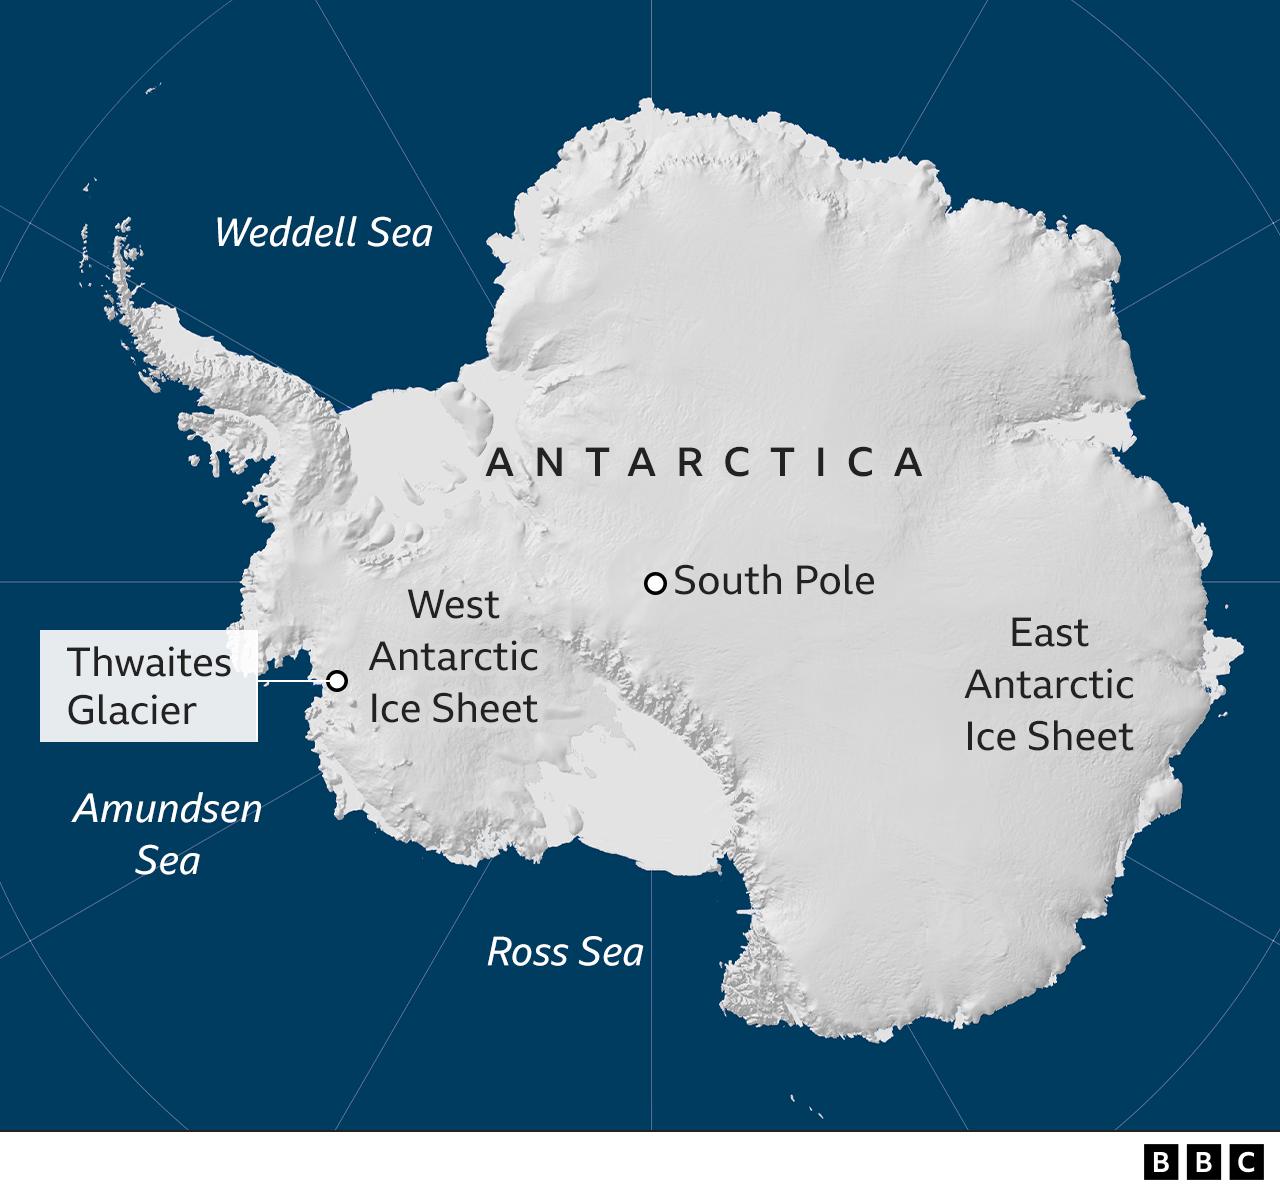 Map of Antarctica, with the smaller West Antarctic Ice Sheet next to the much larger East Antarctic Ice Sheet, and the surrounding oceans. Much of the West Antarctic Ice Sheet, including Thwaites Glacier, flows into the Amundsen Sea to the west.